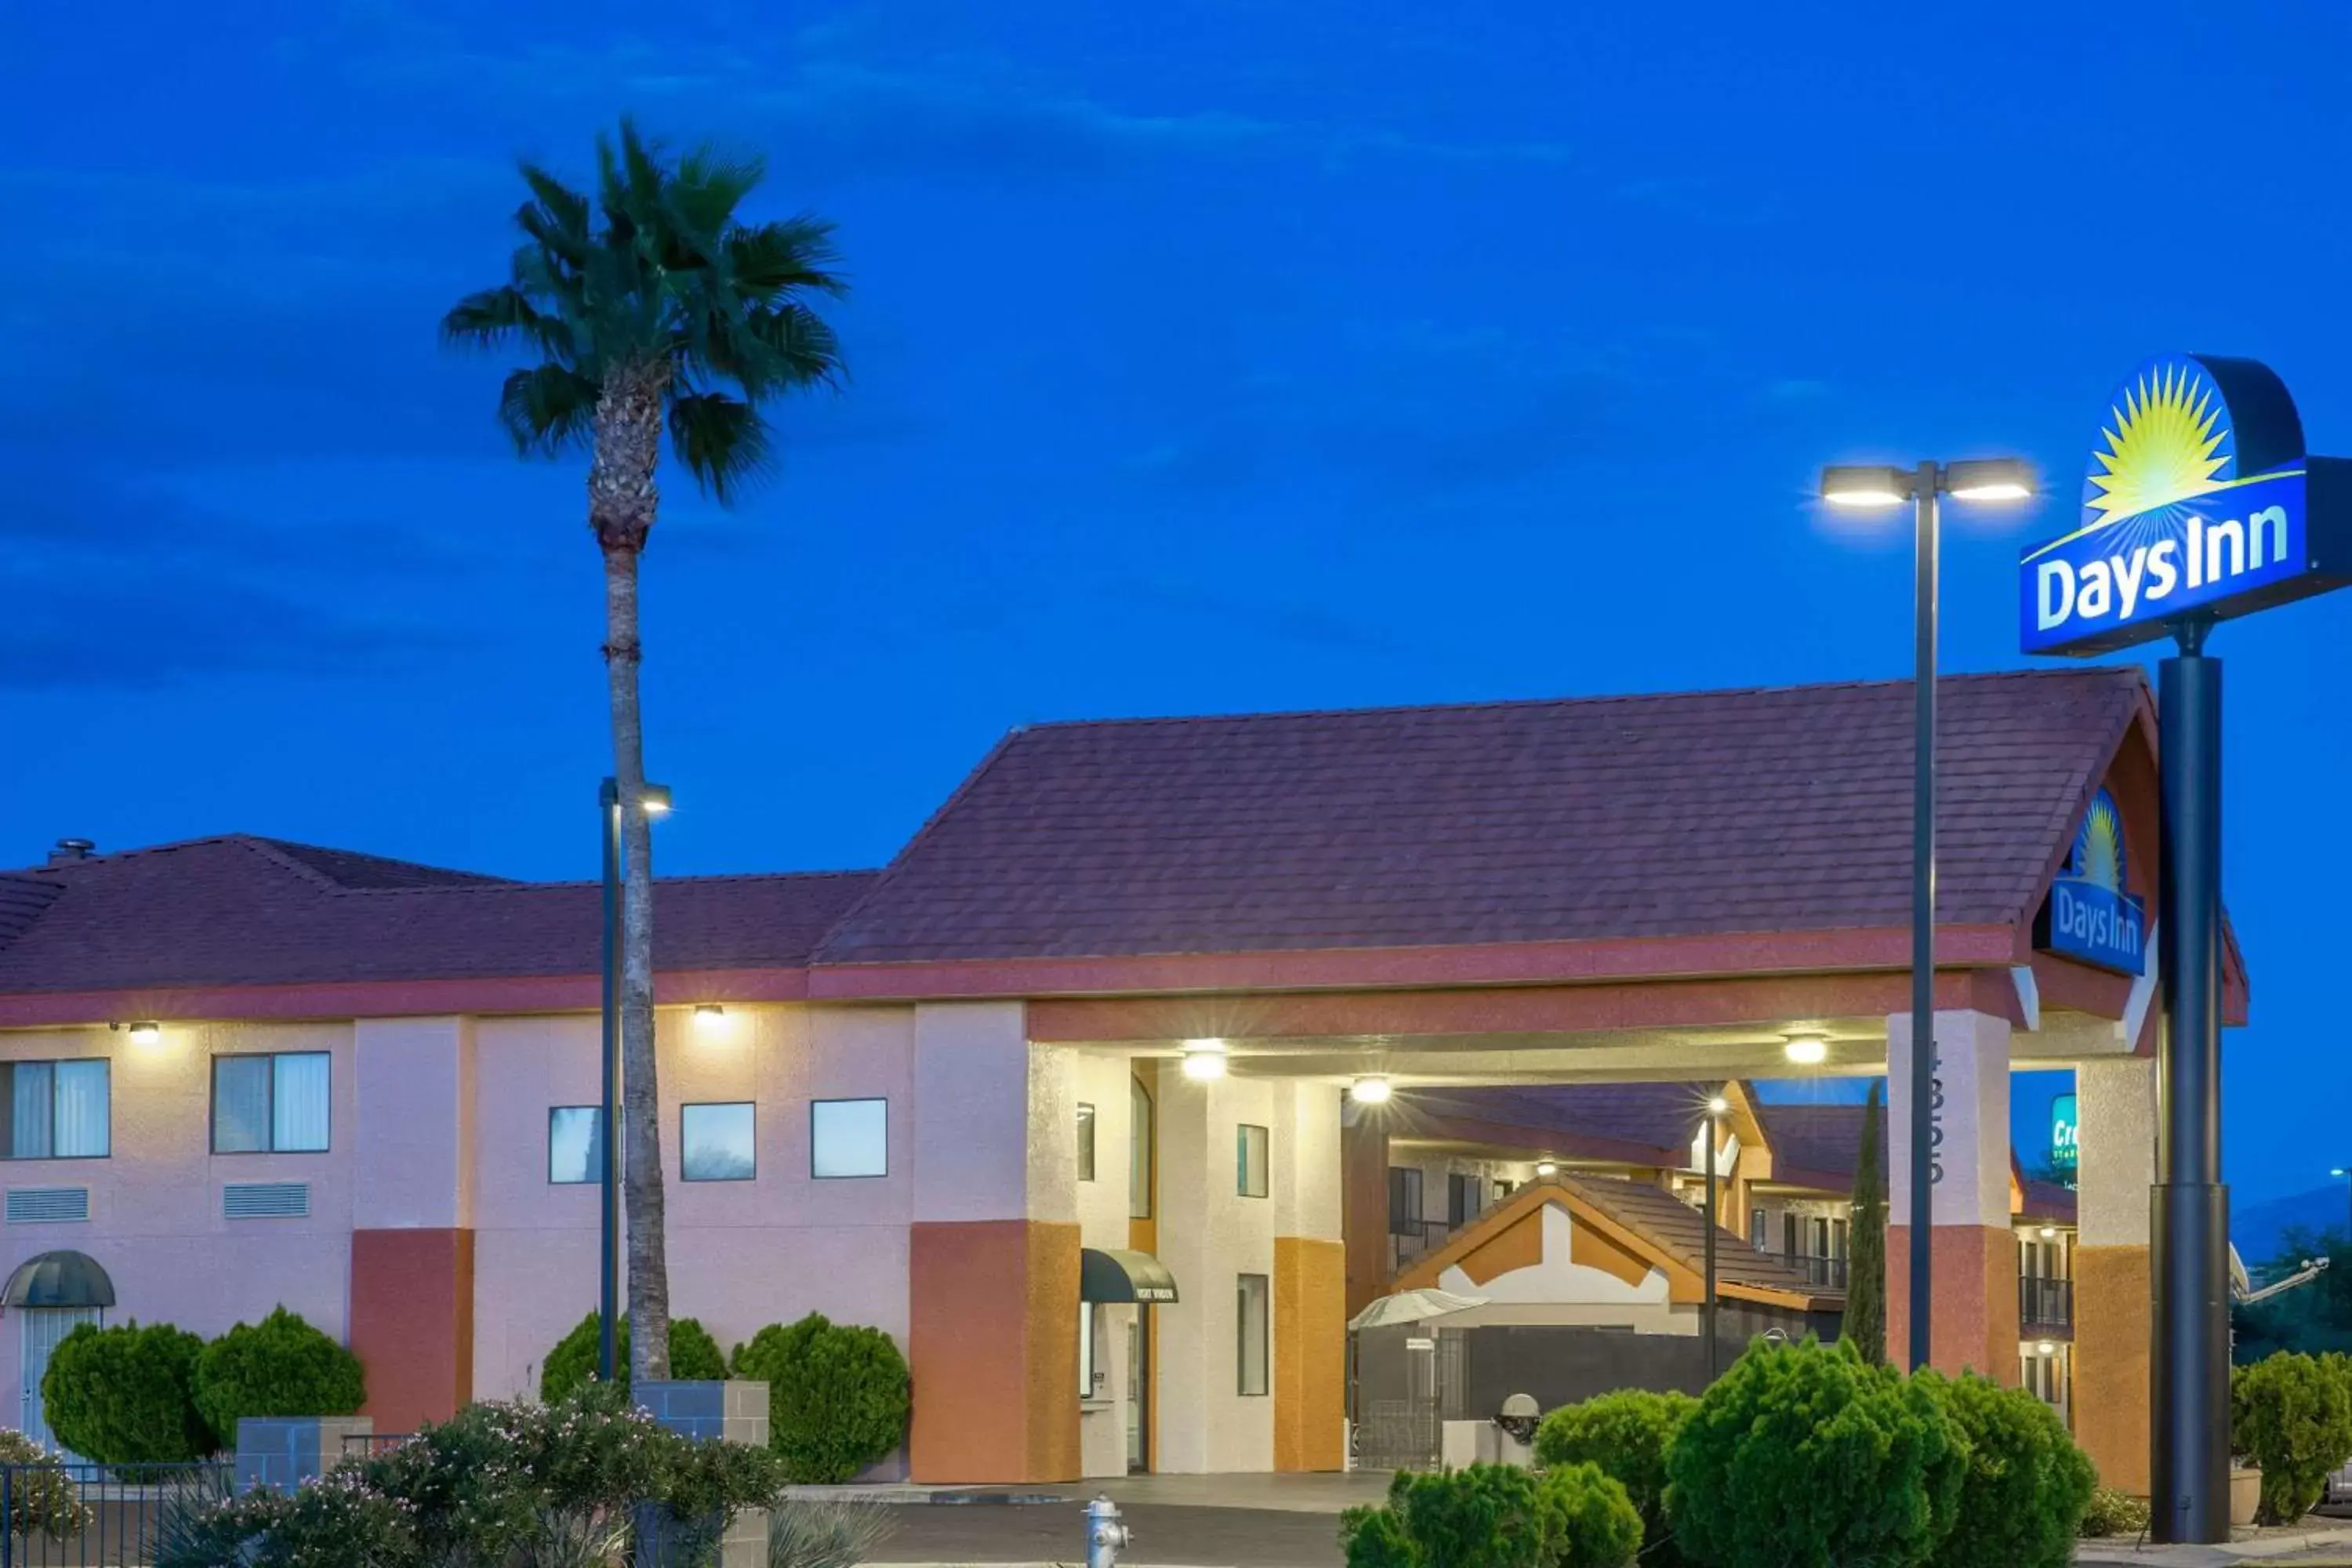 Property building in Days Inn by Wyndham Tucson Airport